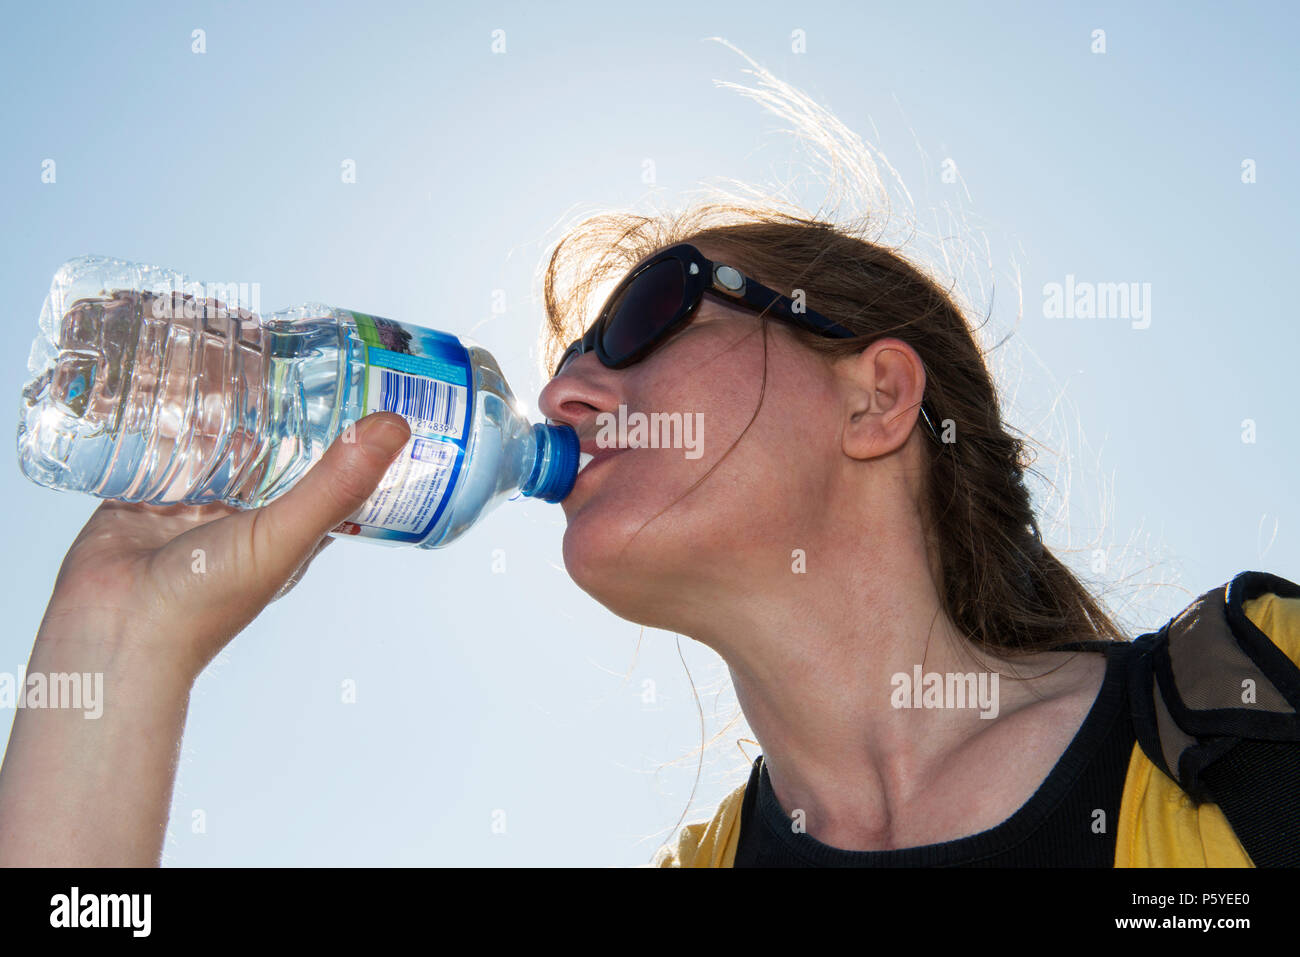 Model released woman enjoying a bottle of spring water on a hot day. Stock Photo